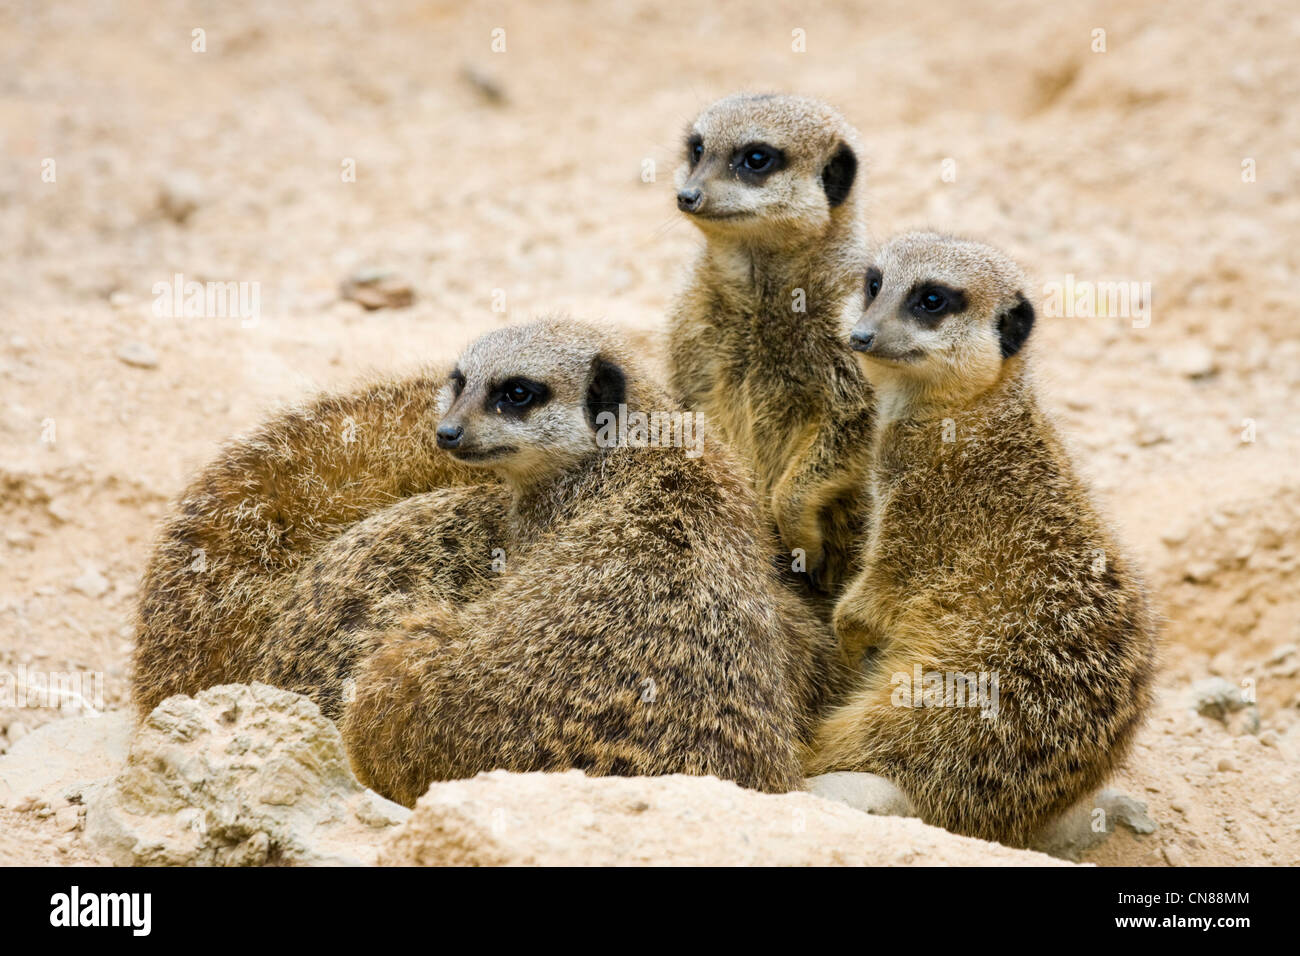 Meerkat in a family group Stock Photo